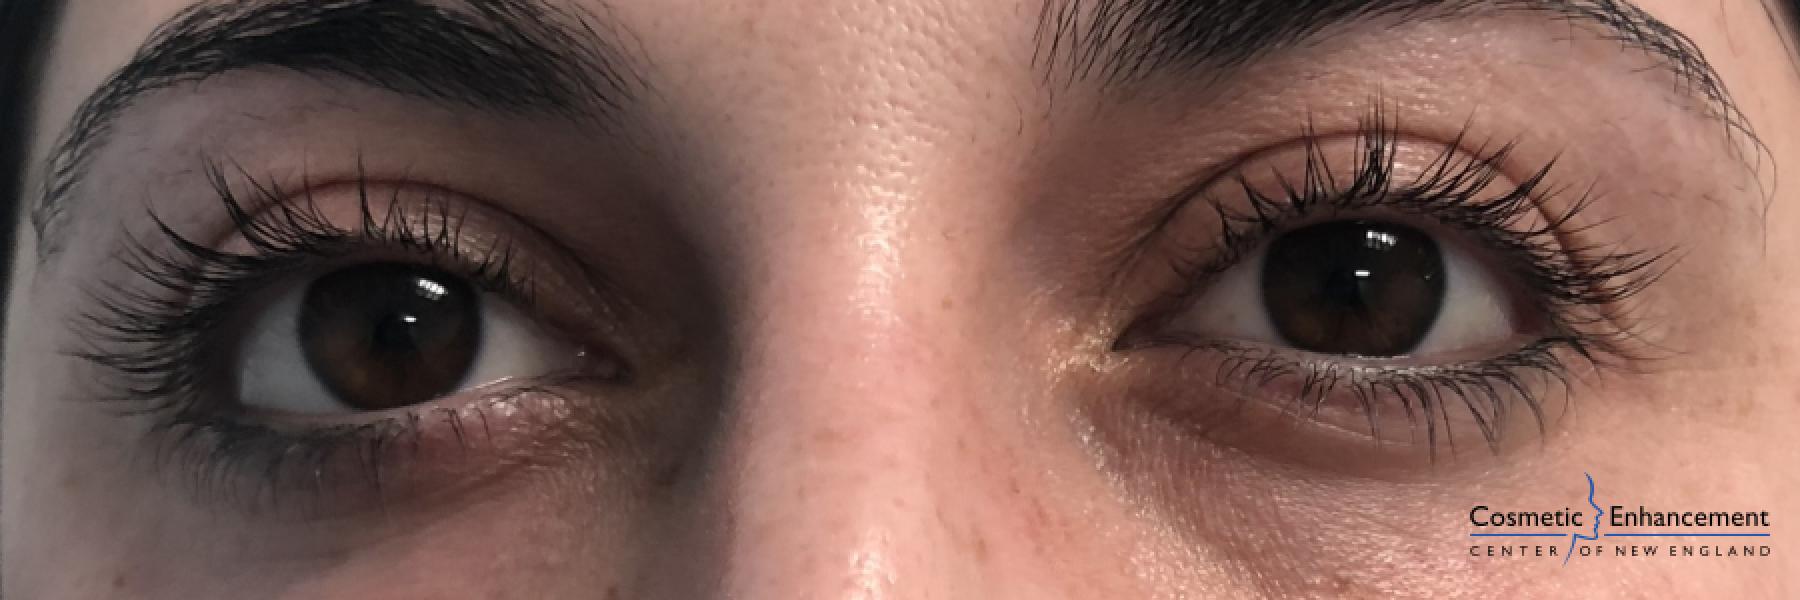 Lash Lift And Tint: Patient 1 - Before 